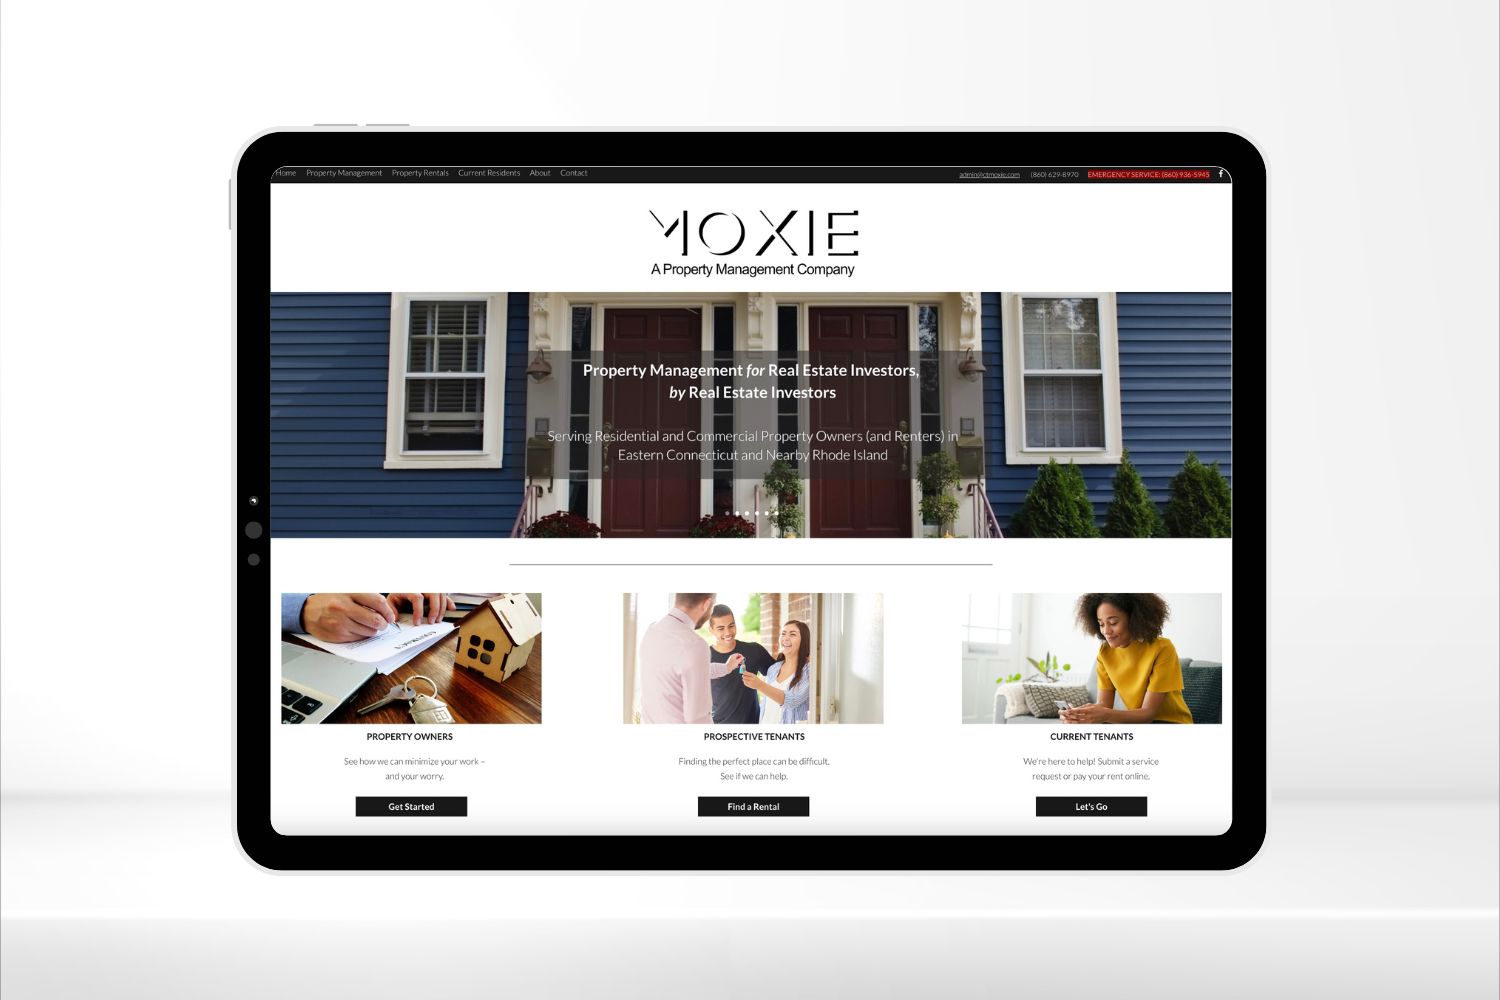 image of MOXIE Property Management website homepage